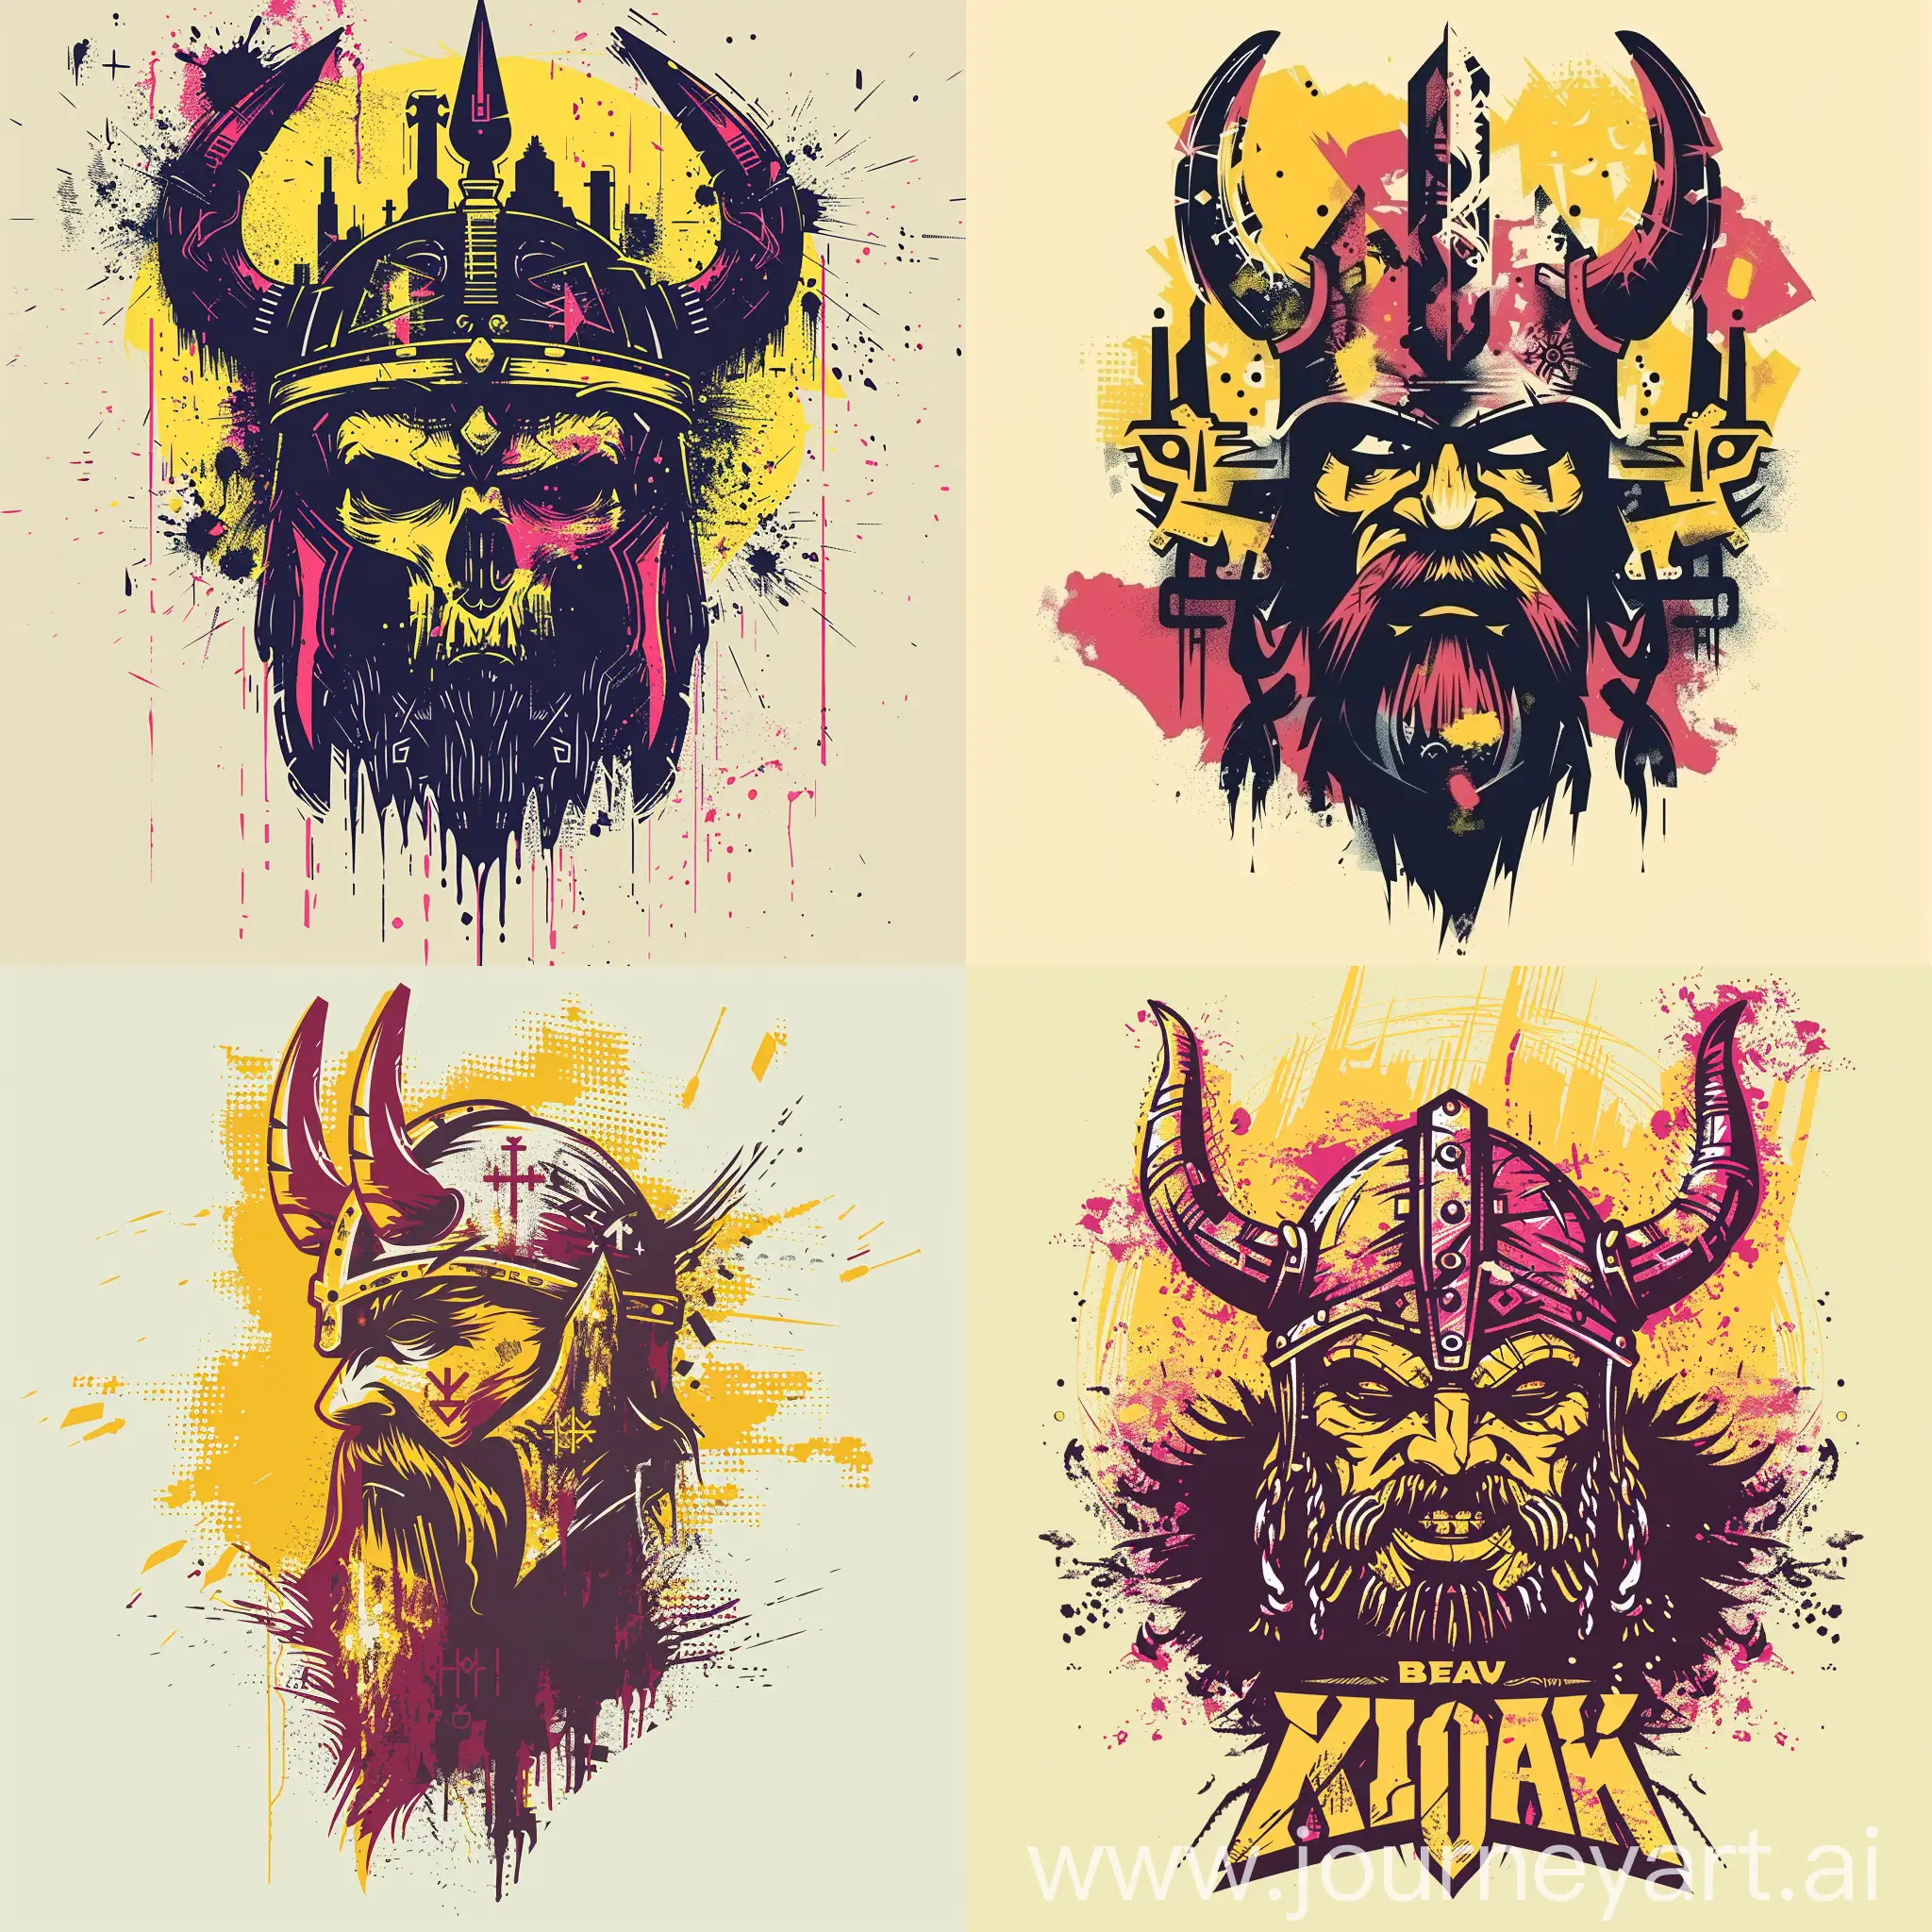 viking vector illustration, in the style of bold graffiti murals, light yellow and dark crimson, city portraits, rough clusters, masks and totems, logo, weathercore